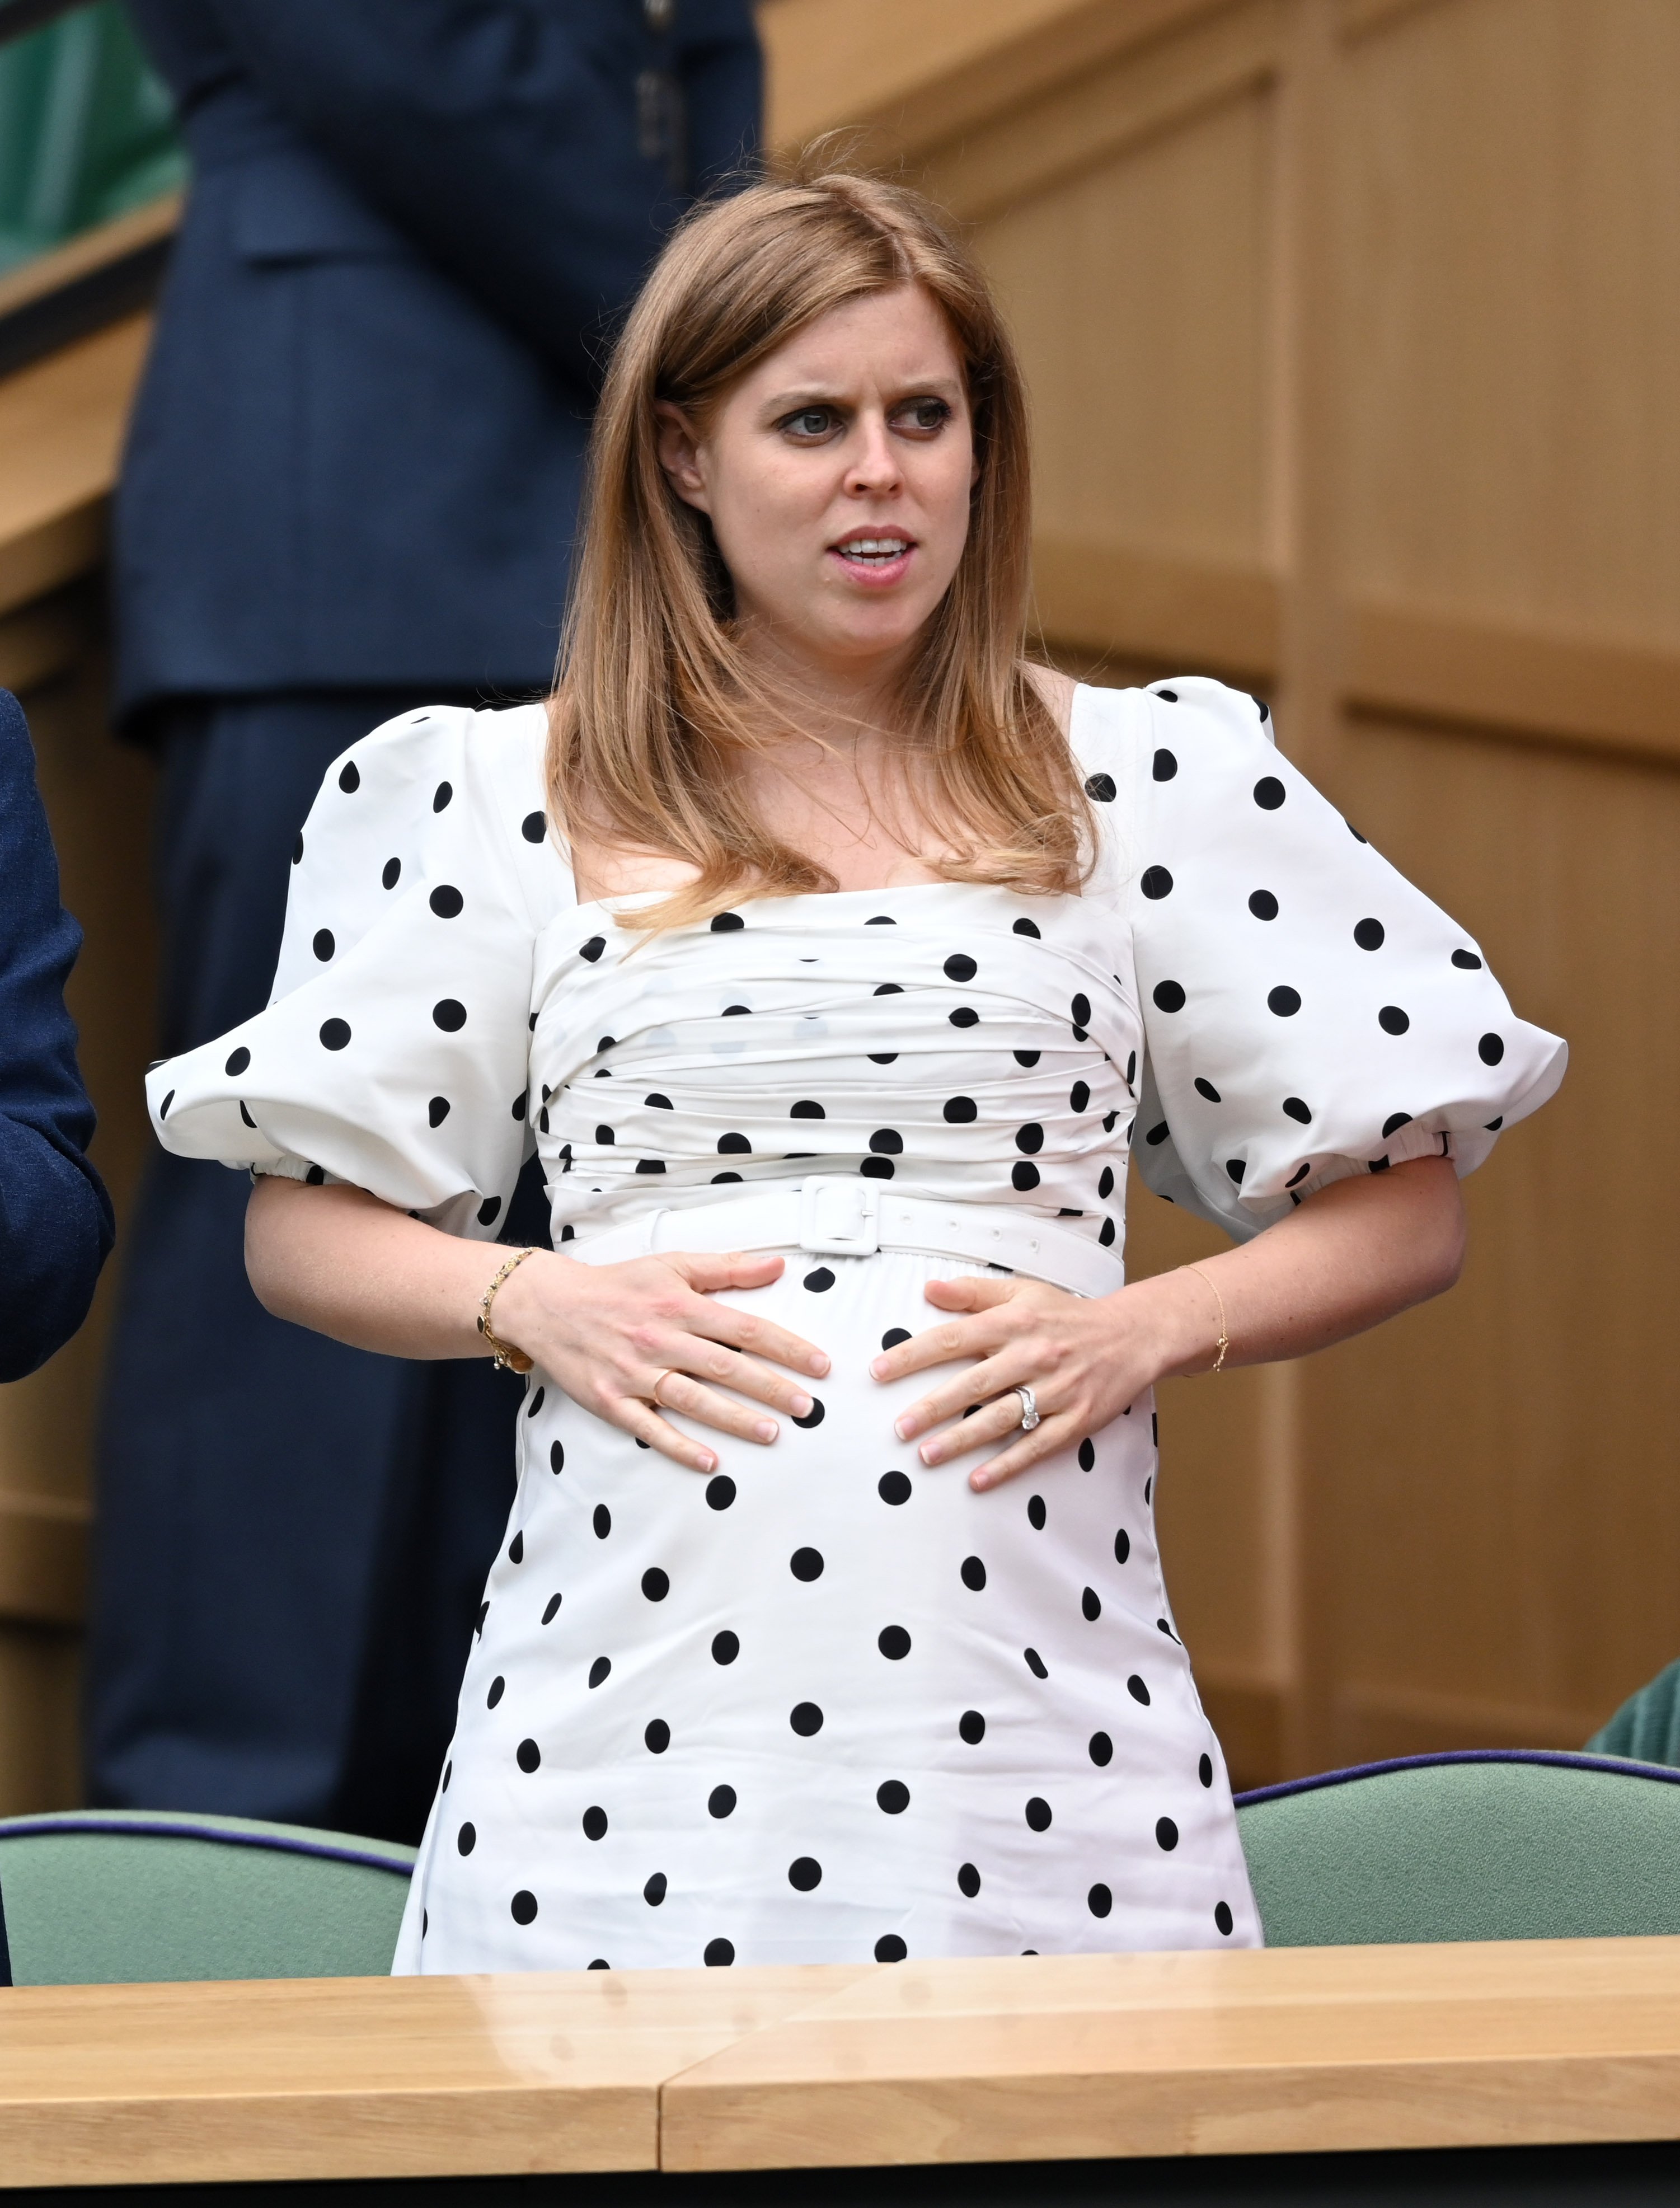  Princess Beatrice of York attends the Wimbledon Tennis Championships at the All England Lawn Tennis and Croquet Club on July 08, 2021 | Photo: Getty Images